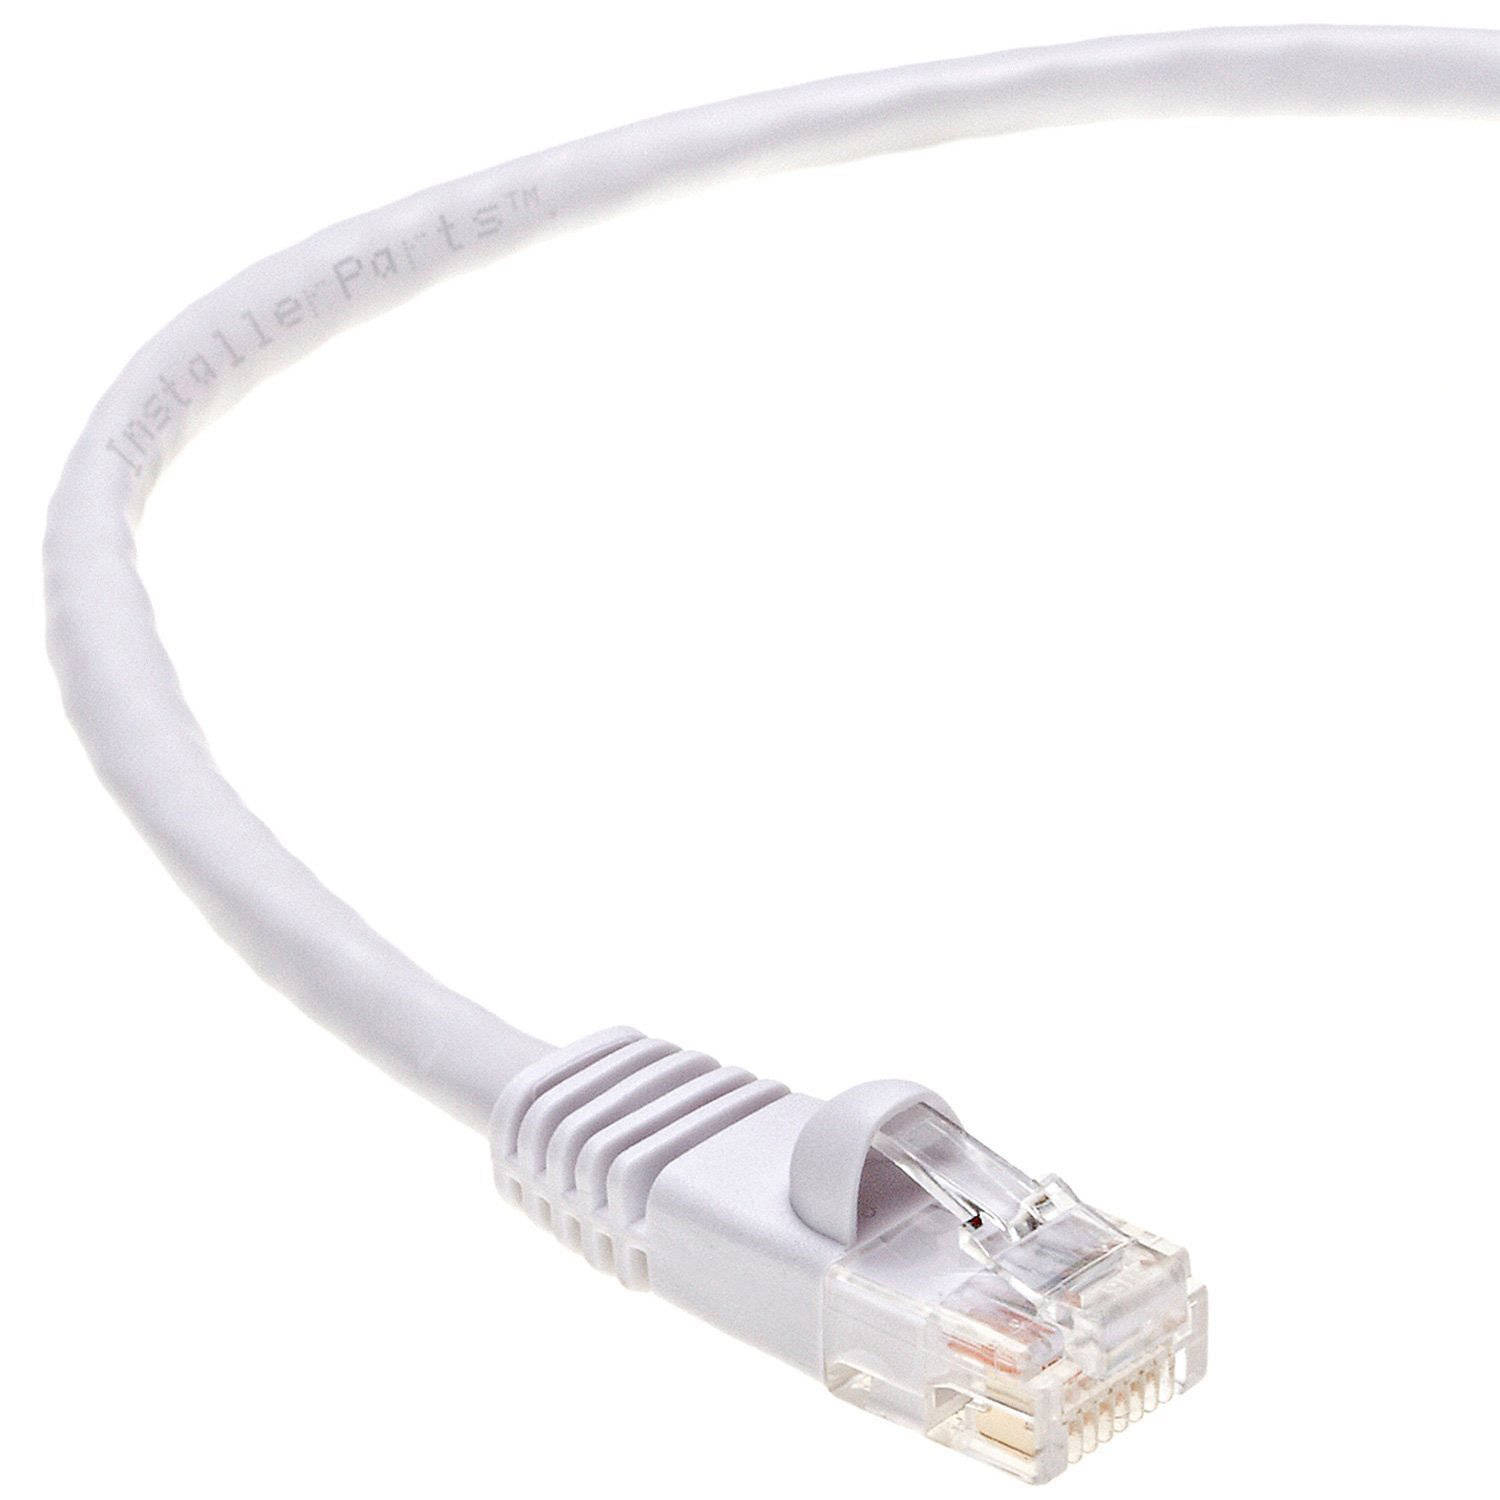 InstallerParts (5 Pack) Ethernet Cable CAT6 Cable UTP Booted 100 FT - White - Professional Series - 10Gigabit/Sec Network / High Speed Internet Cable, 550MHZ - image 1 of 5